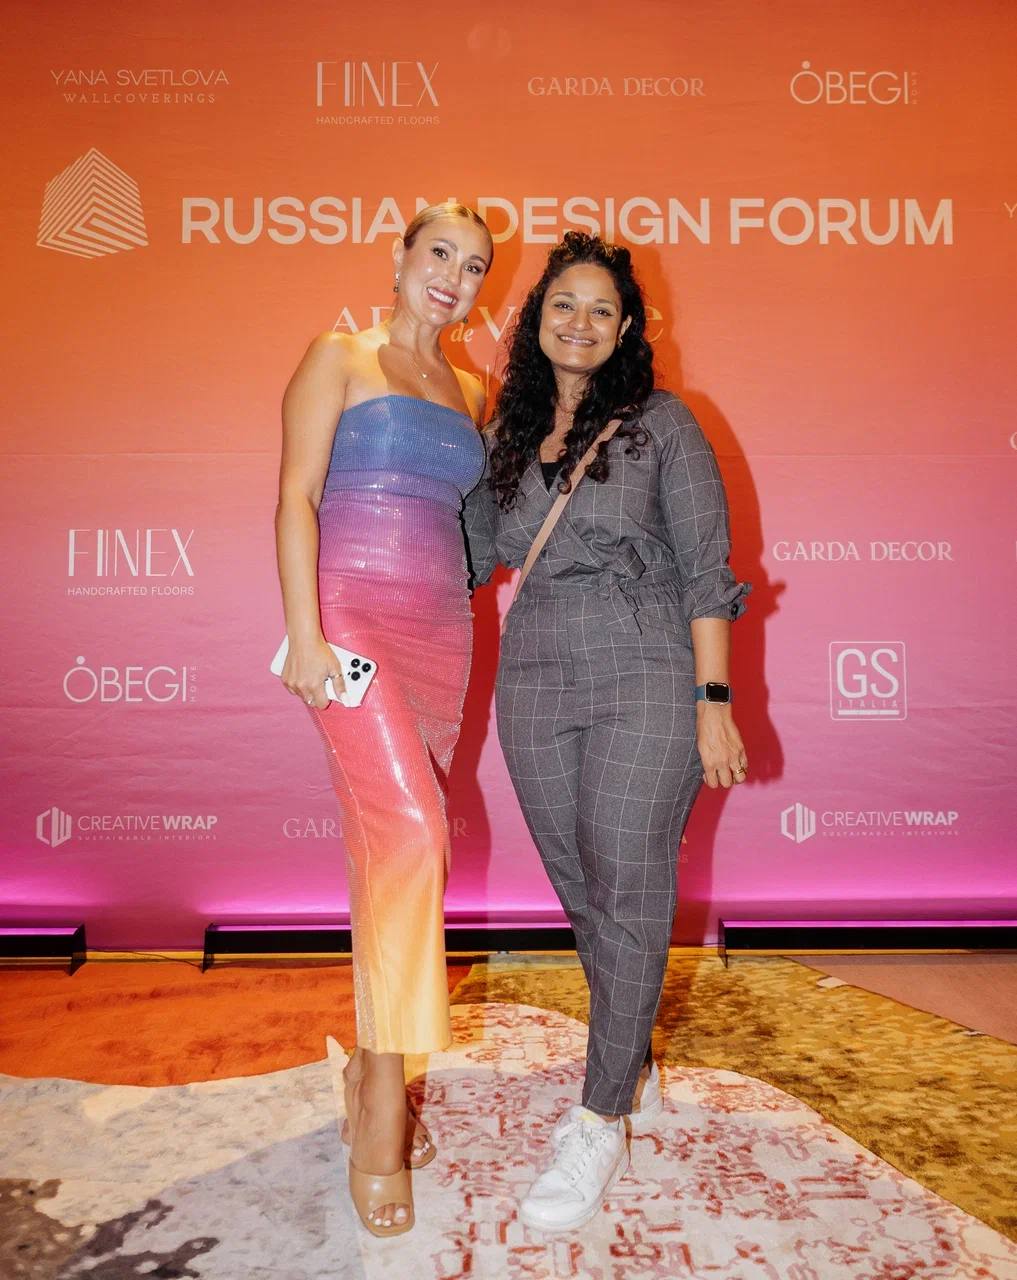 A landmark event took place in Dubai with the inaugural Russian Design Forum. 